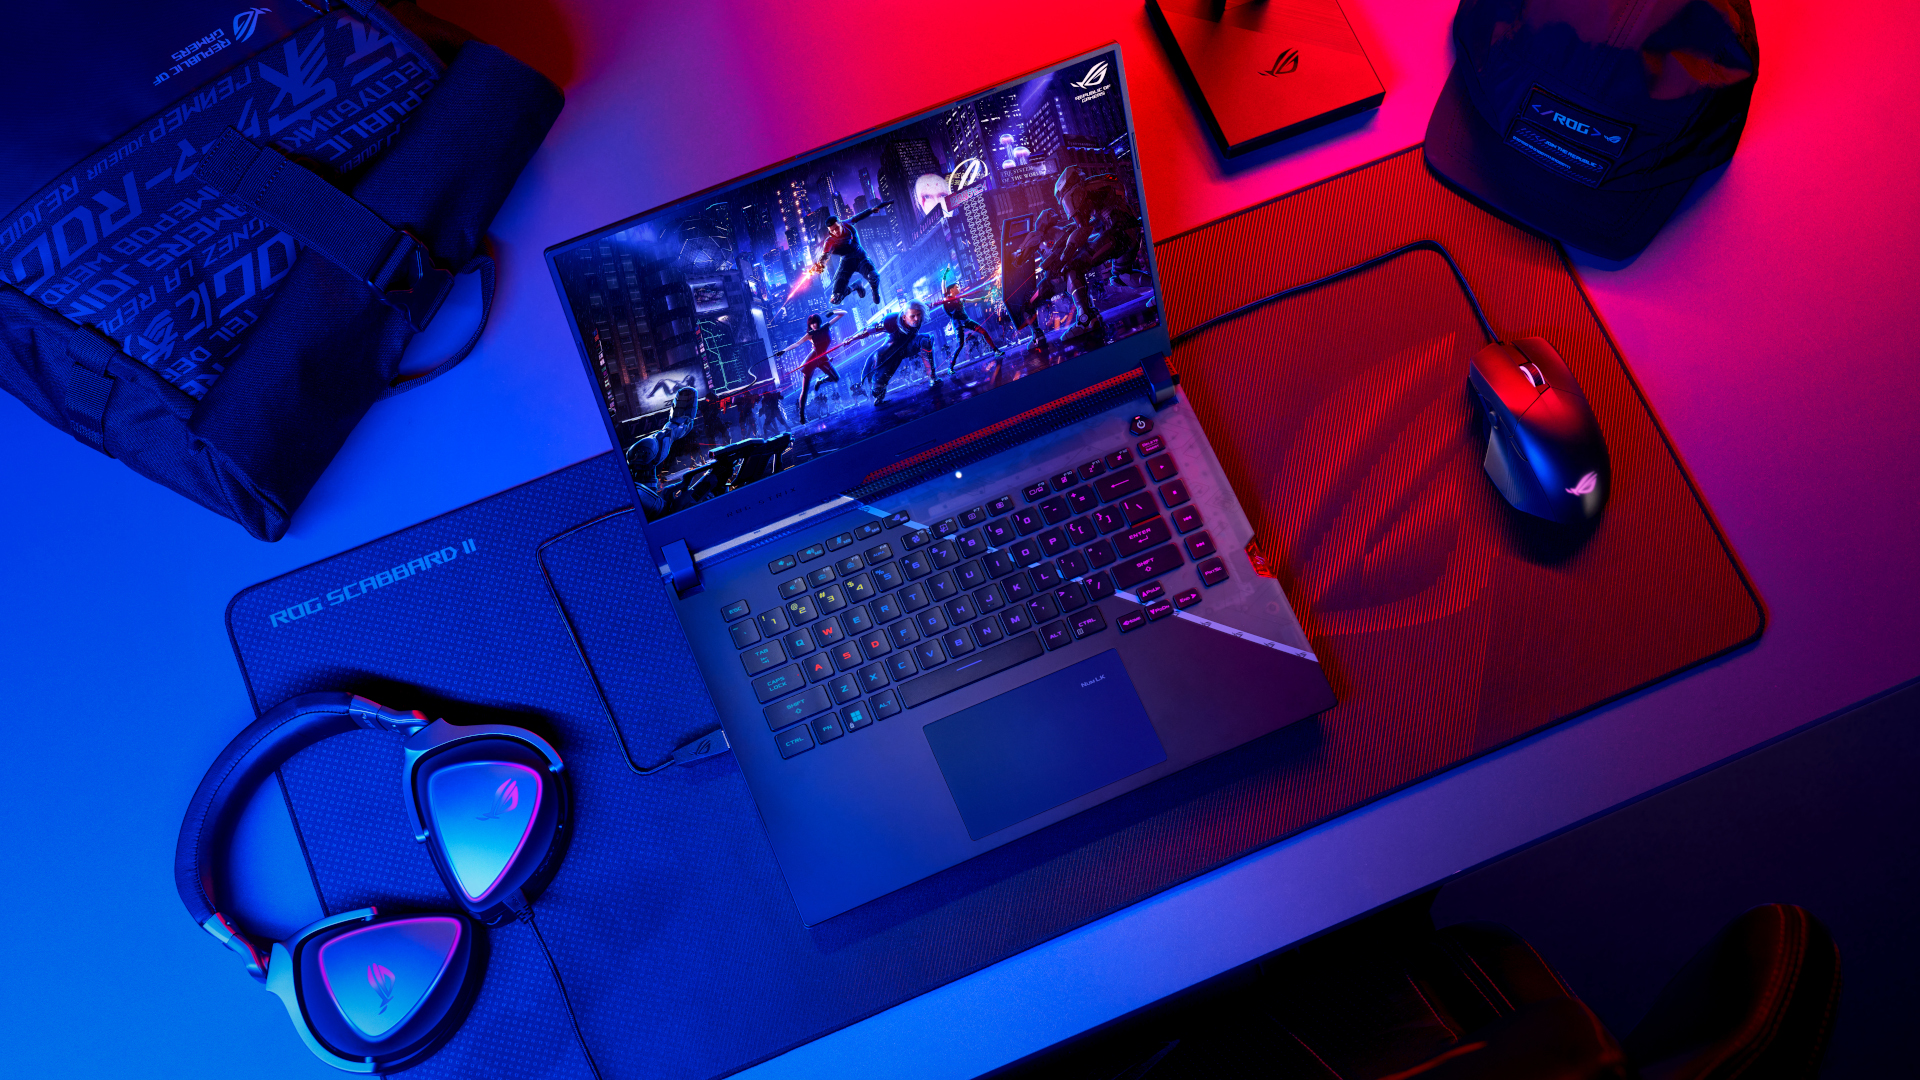 The new Asus ROG Strix Scar could be the ultimate esports enthusiast gaming laptop